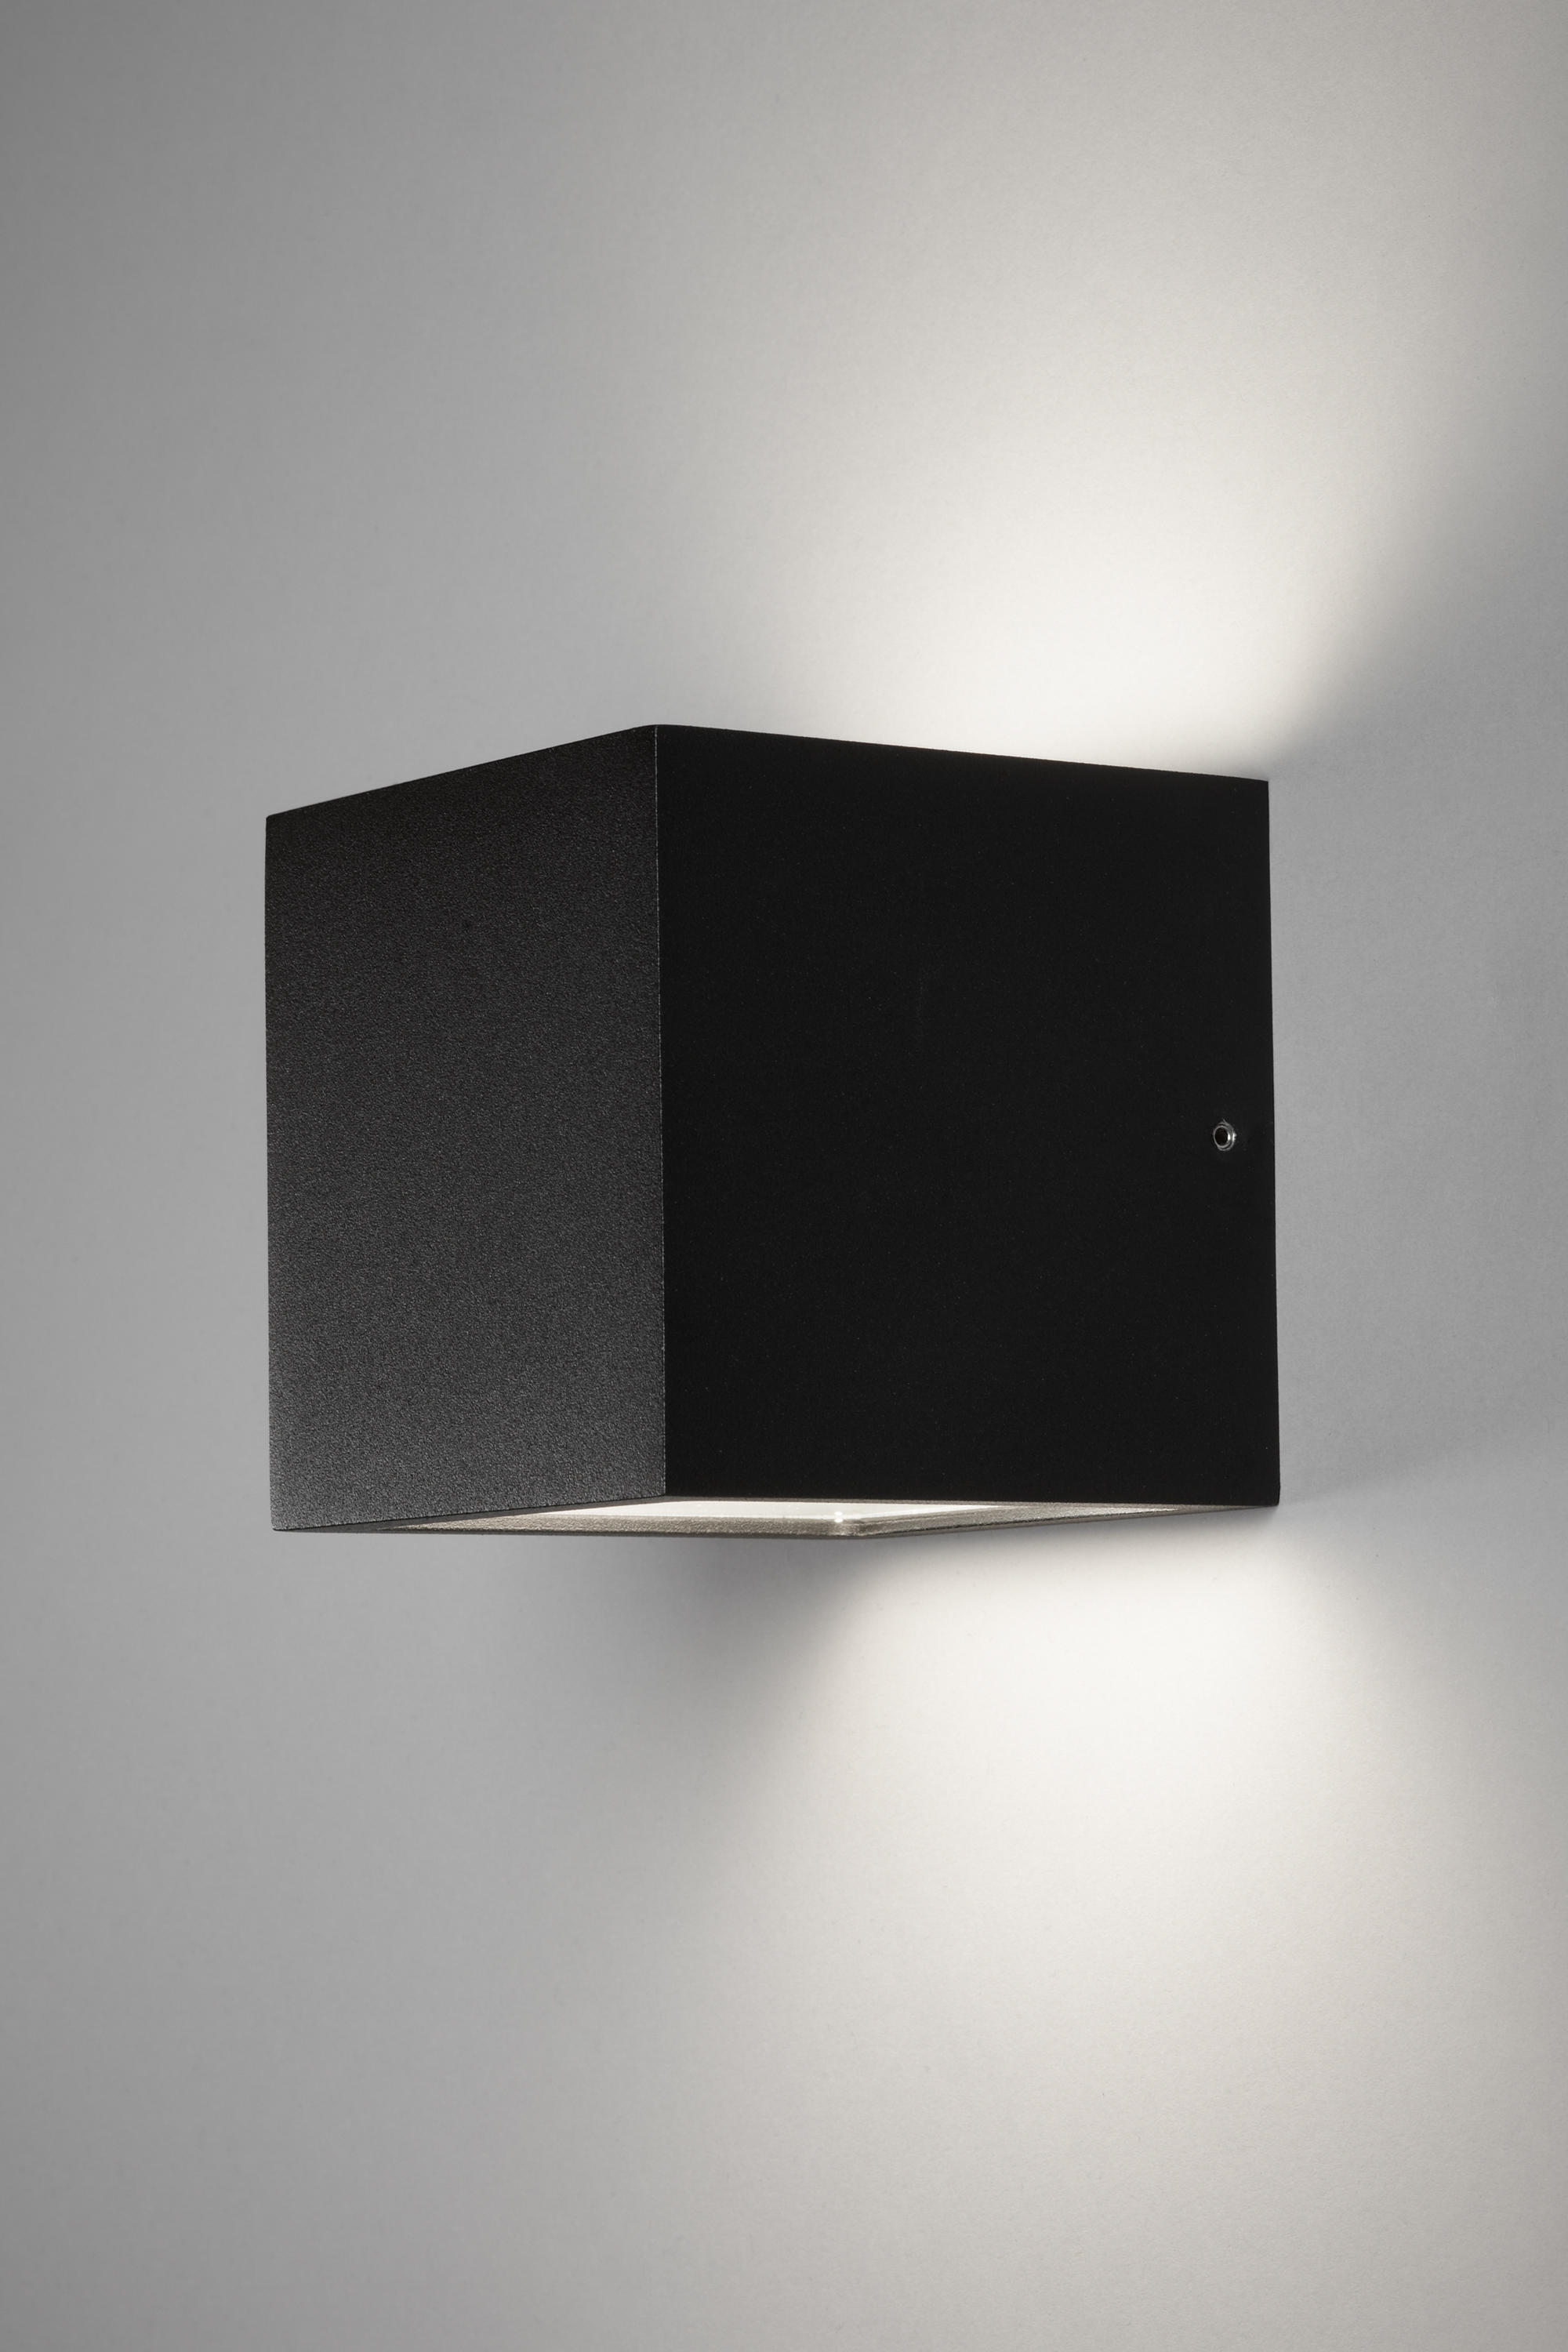 Grisling Lav aftensmad Hollow Cube XL Up Down E27 & designer furniture | Architonic